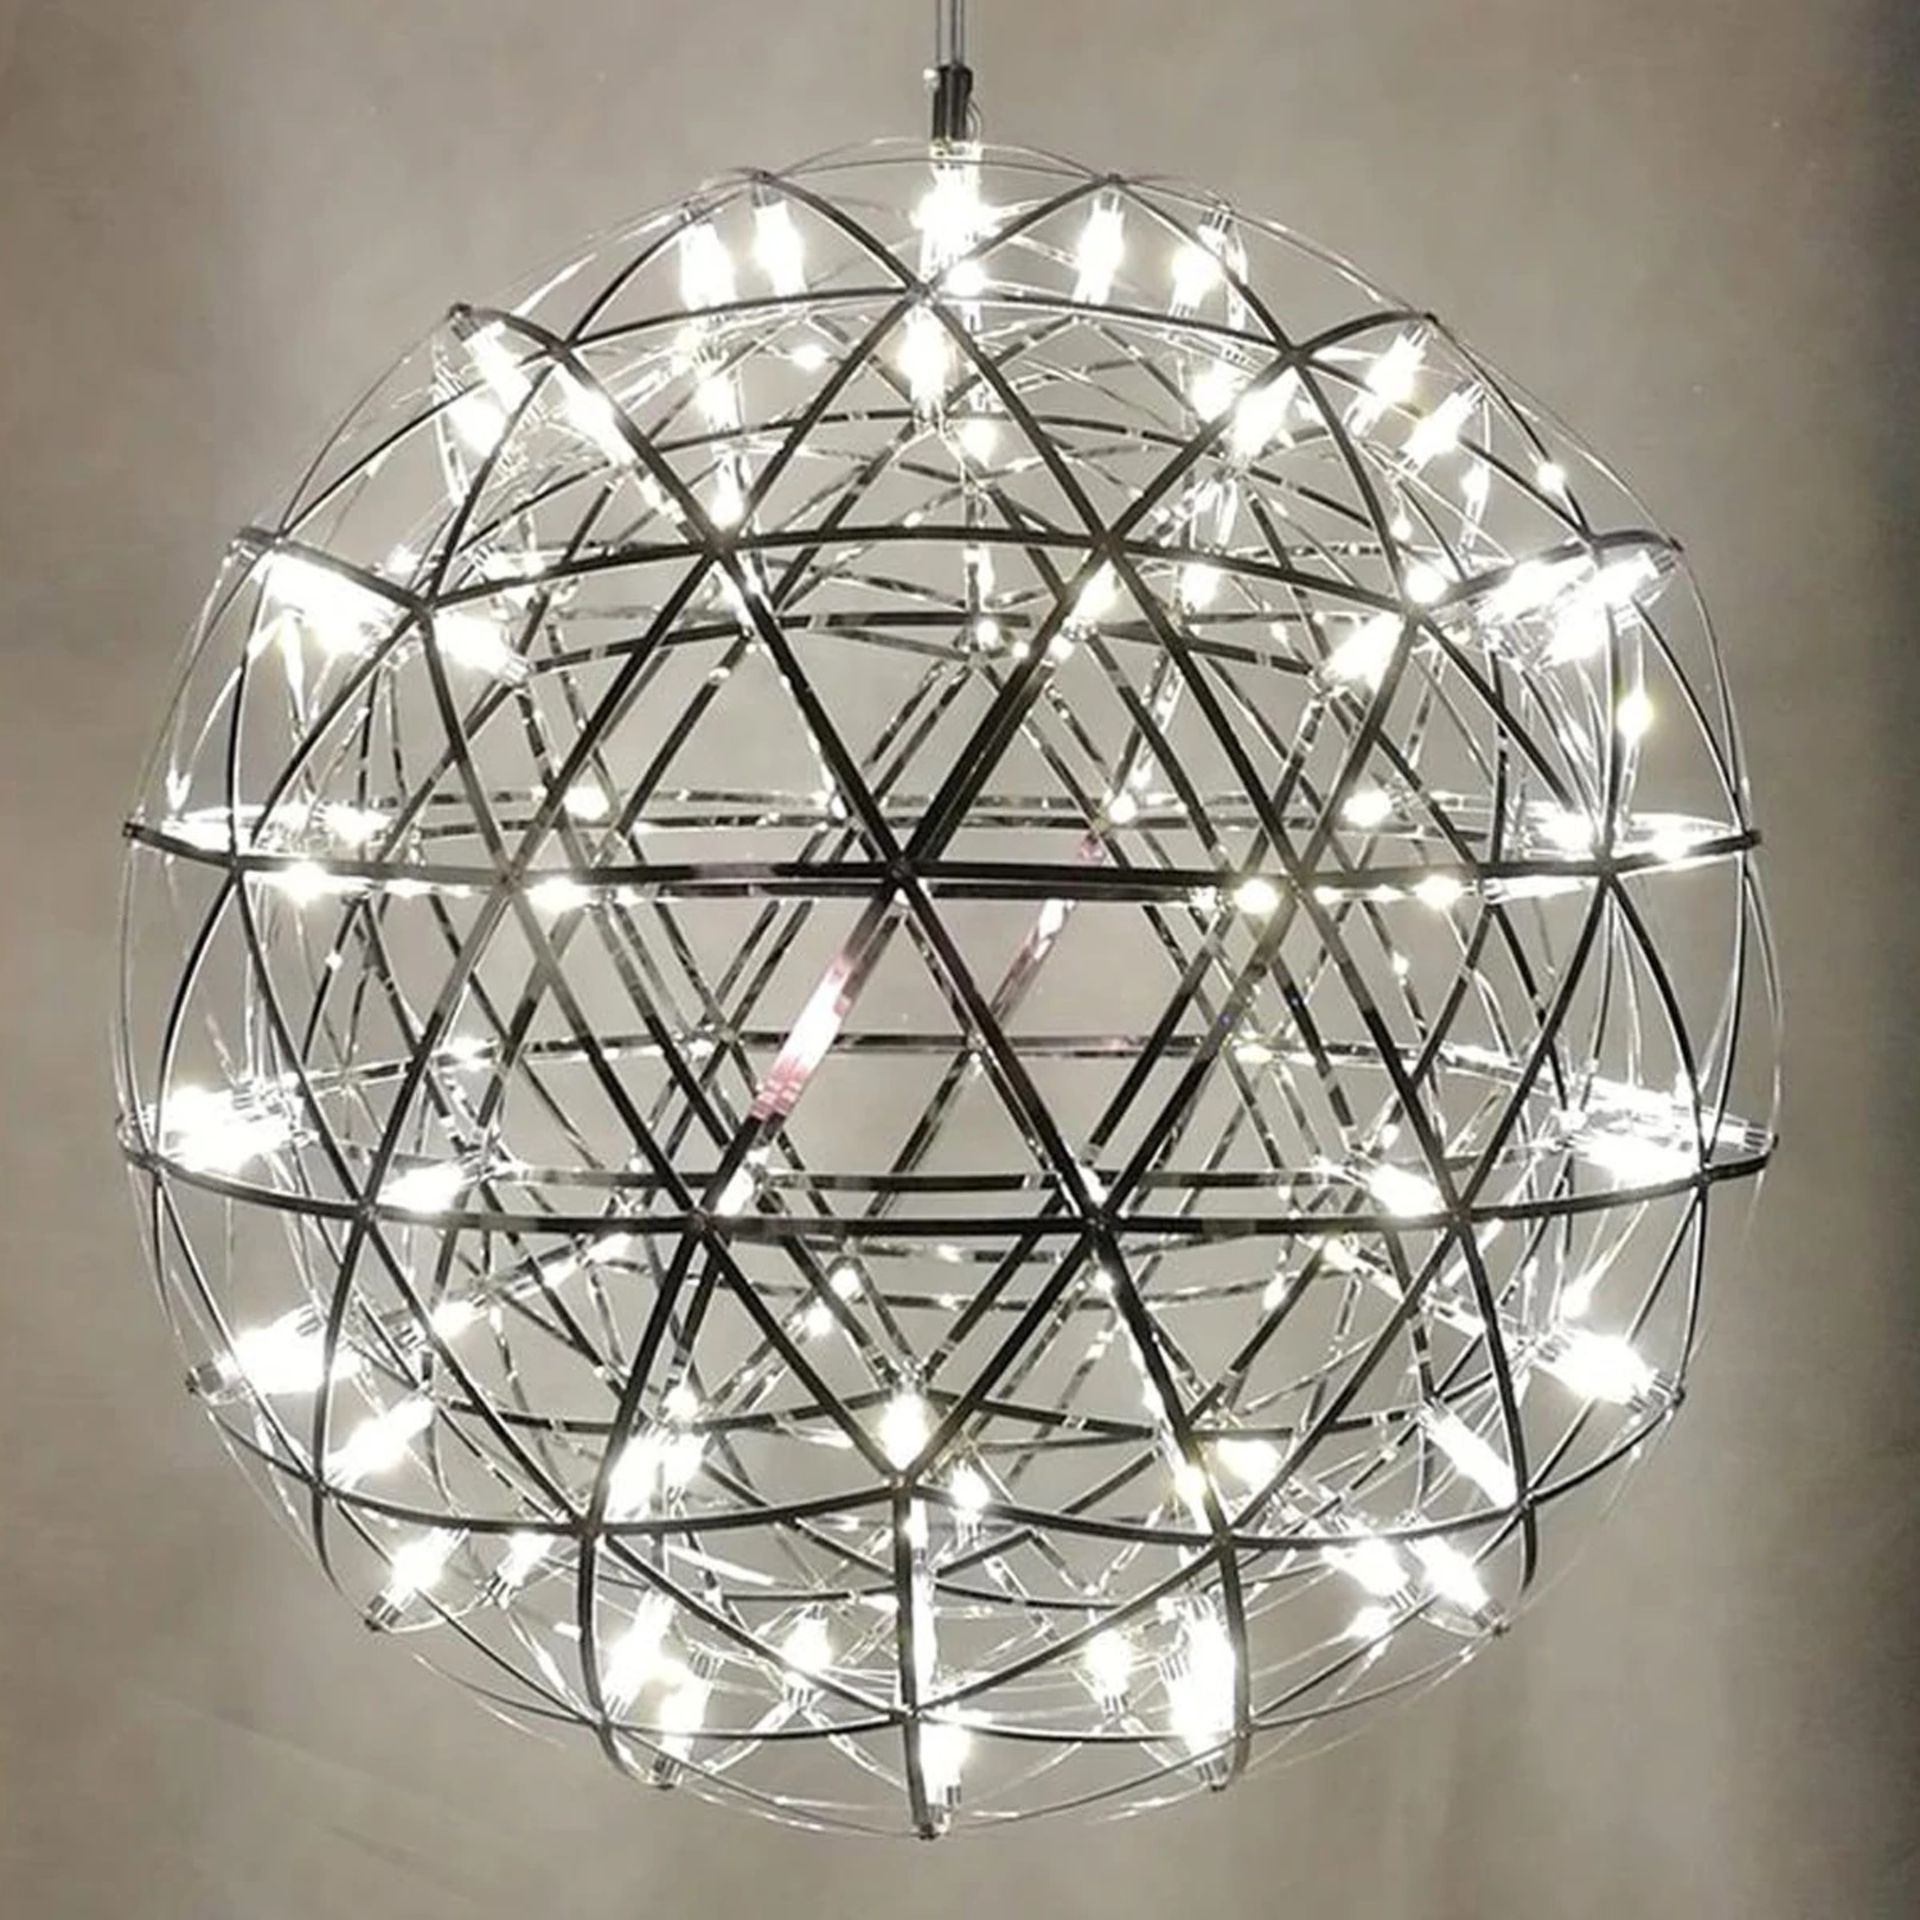 Starburst Extra Large Hanging Pendant 120cm diameter x 162 lights with its chrome bodied spherical - Image 2 of 3